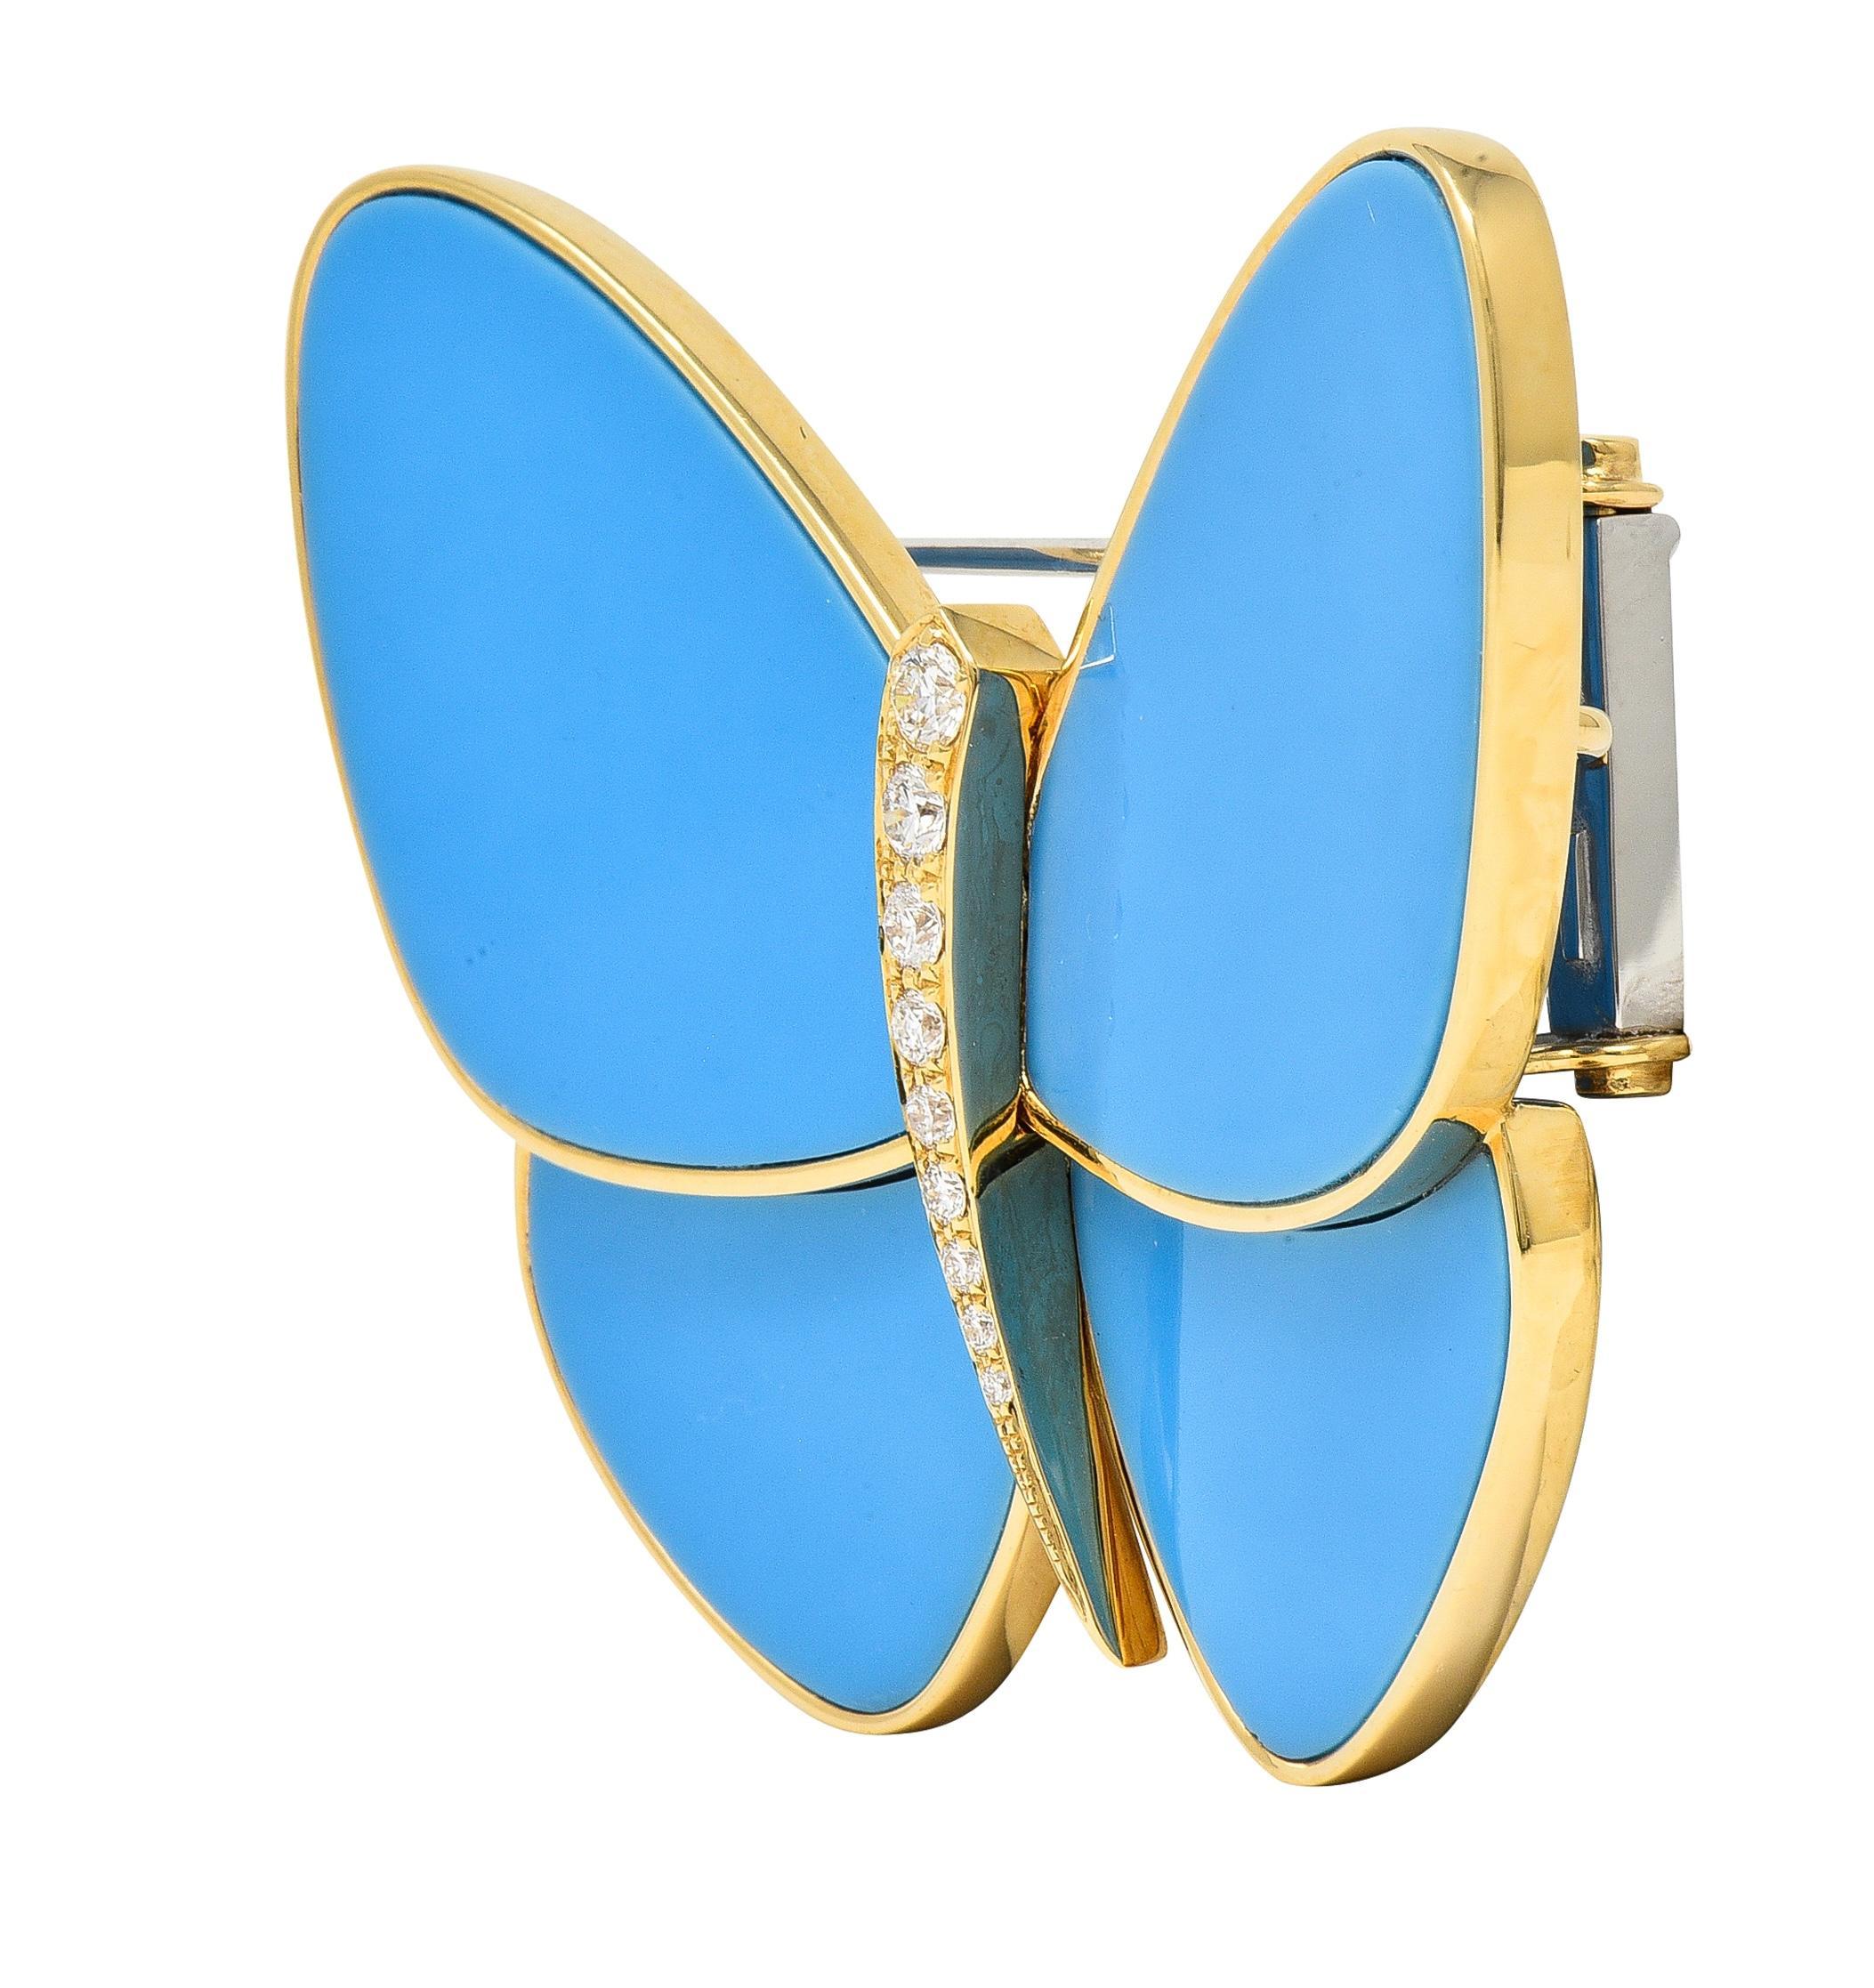 Designed a stylized butterfly featuring inlaid turquoise wings 
Opaque strong robin's egg blue in color
Centering round brilliant cut diamonds 
Bead set in body and graduating in size
Weighing approximately 0.38 carat total
G/H color with VS